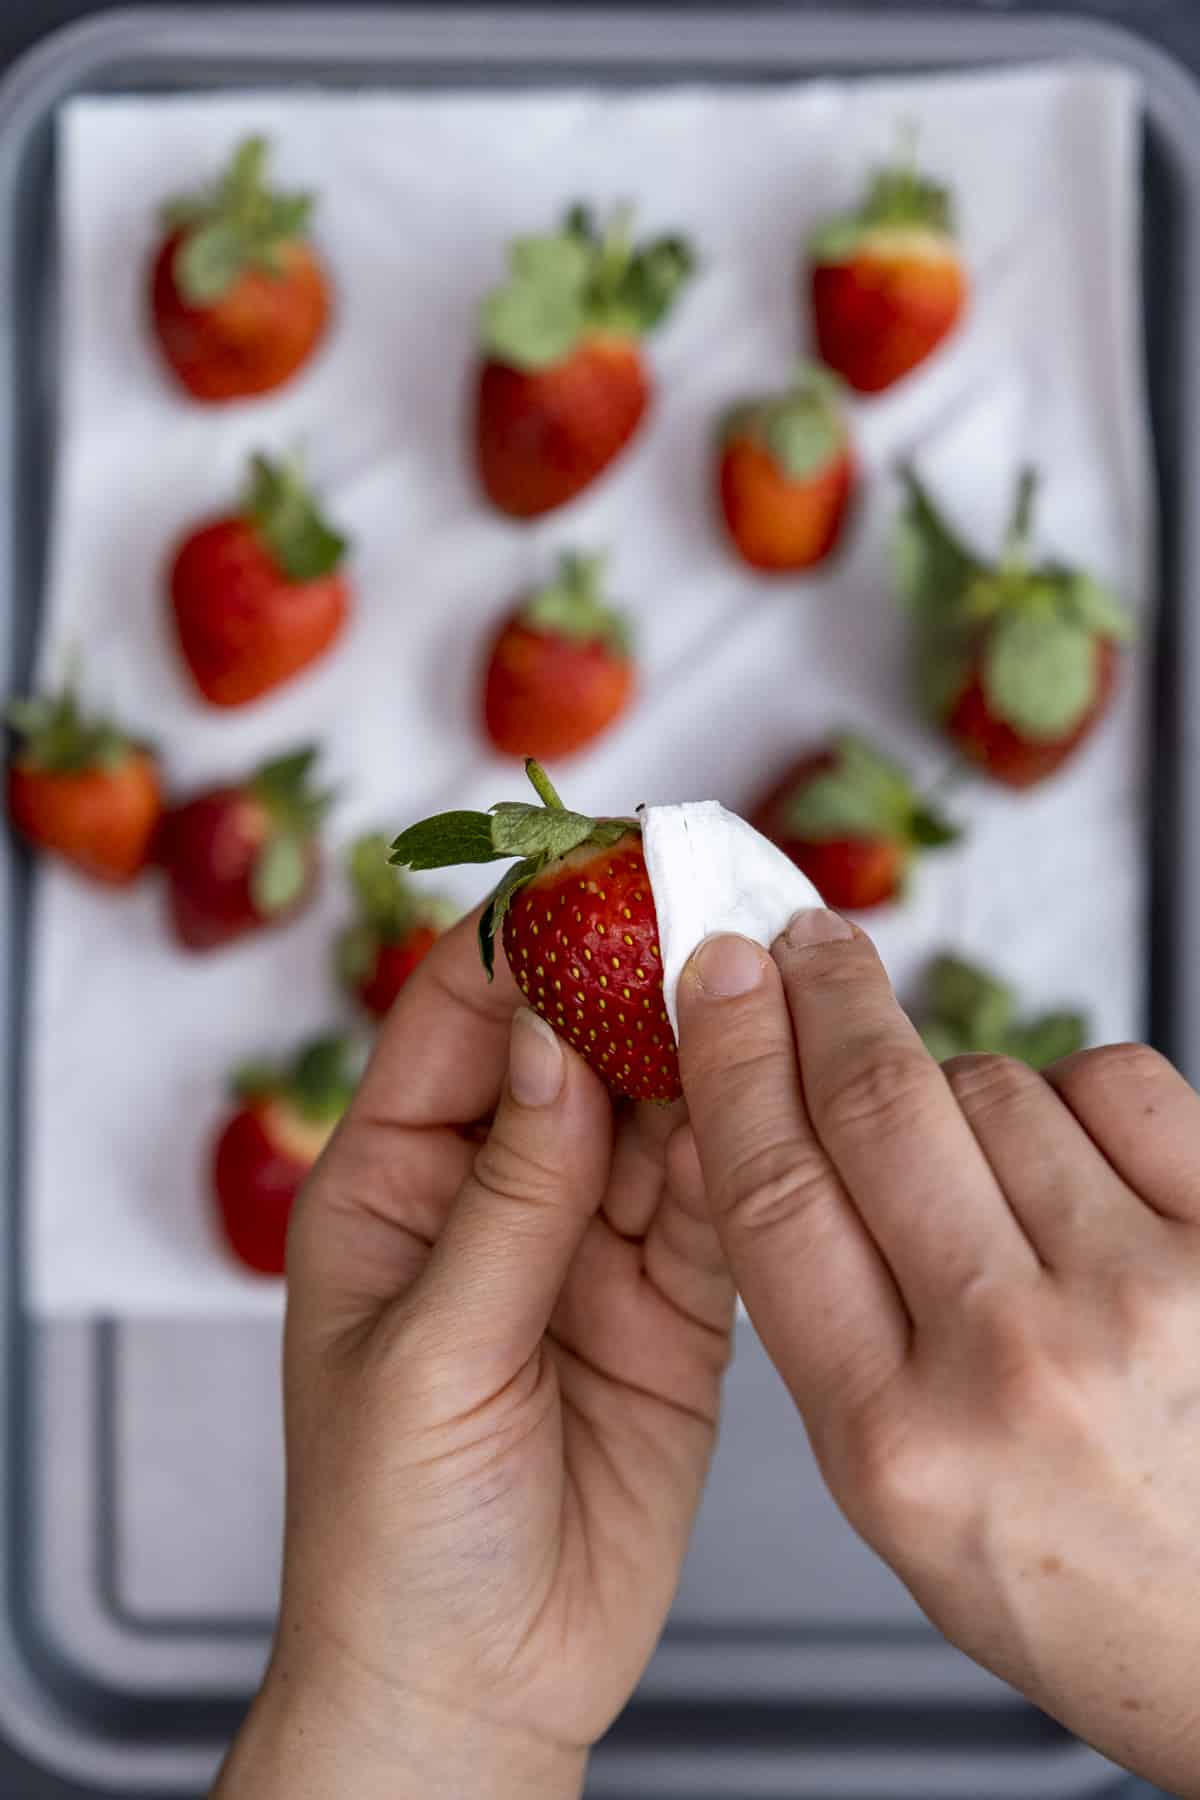 Hands drying strawberries with paper towel.